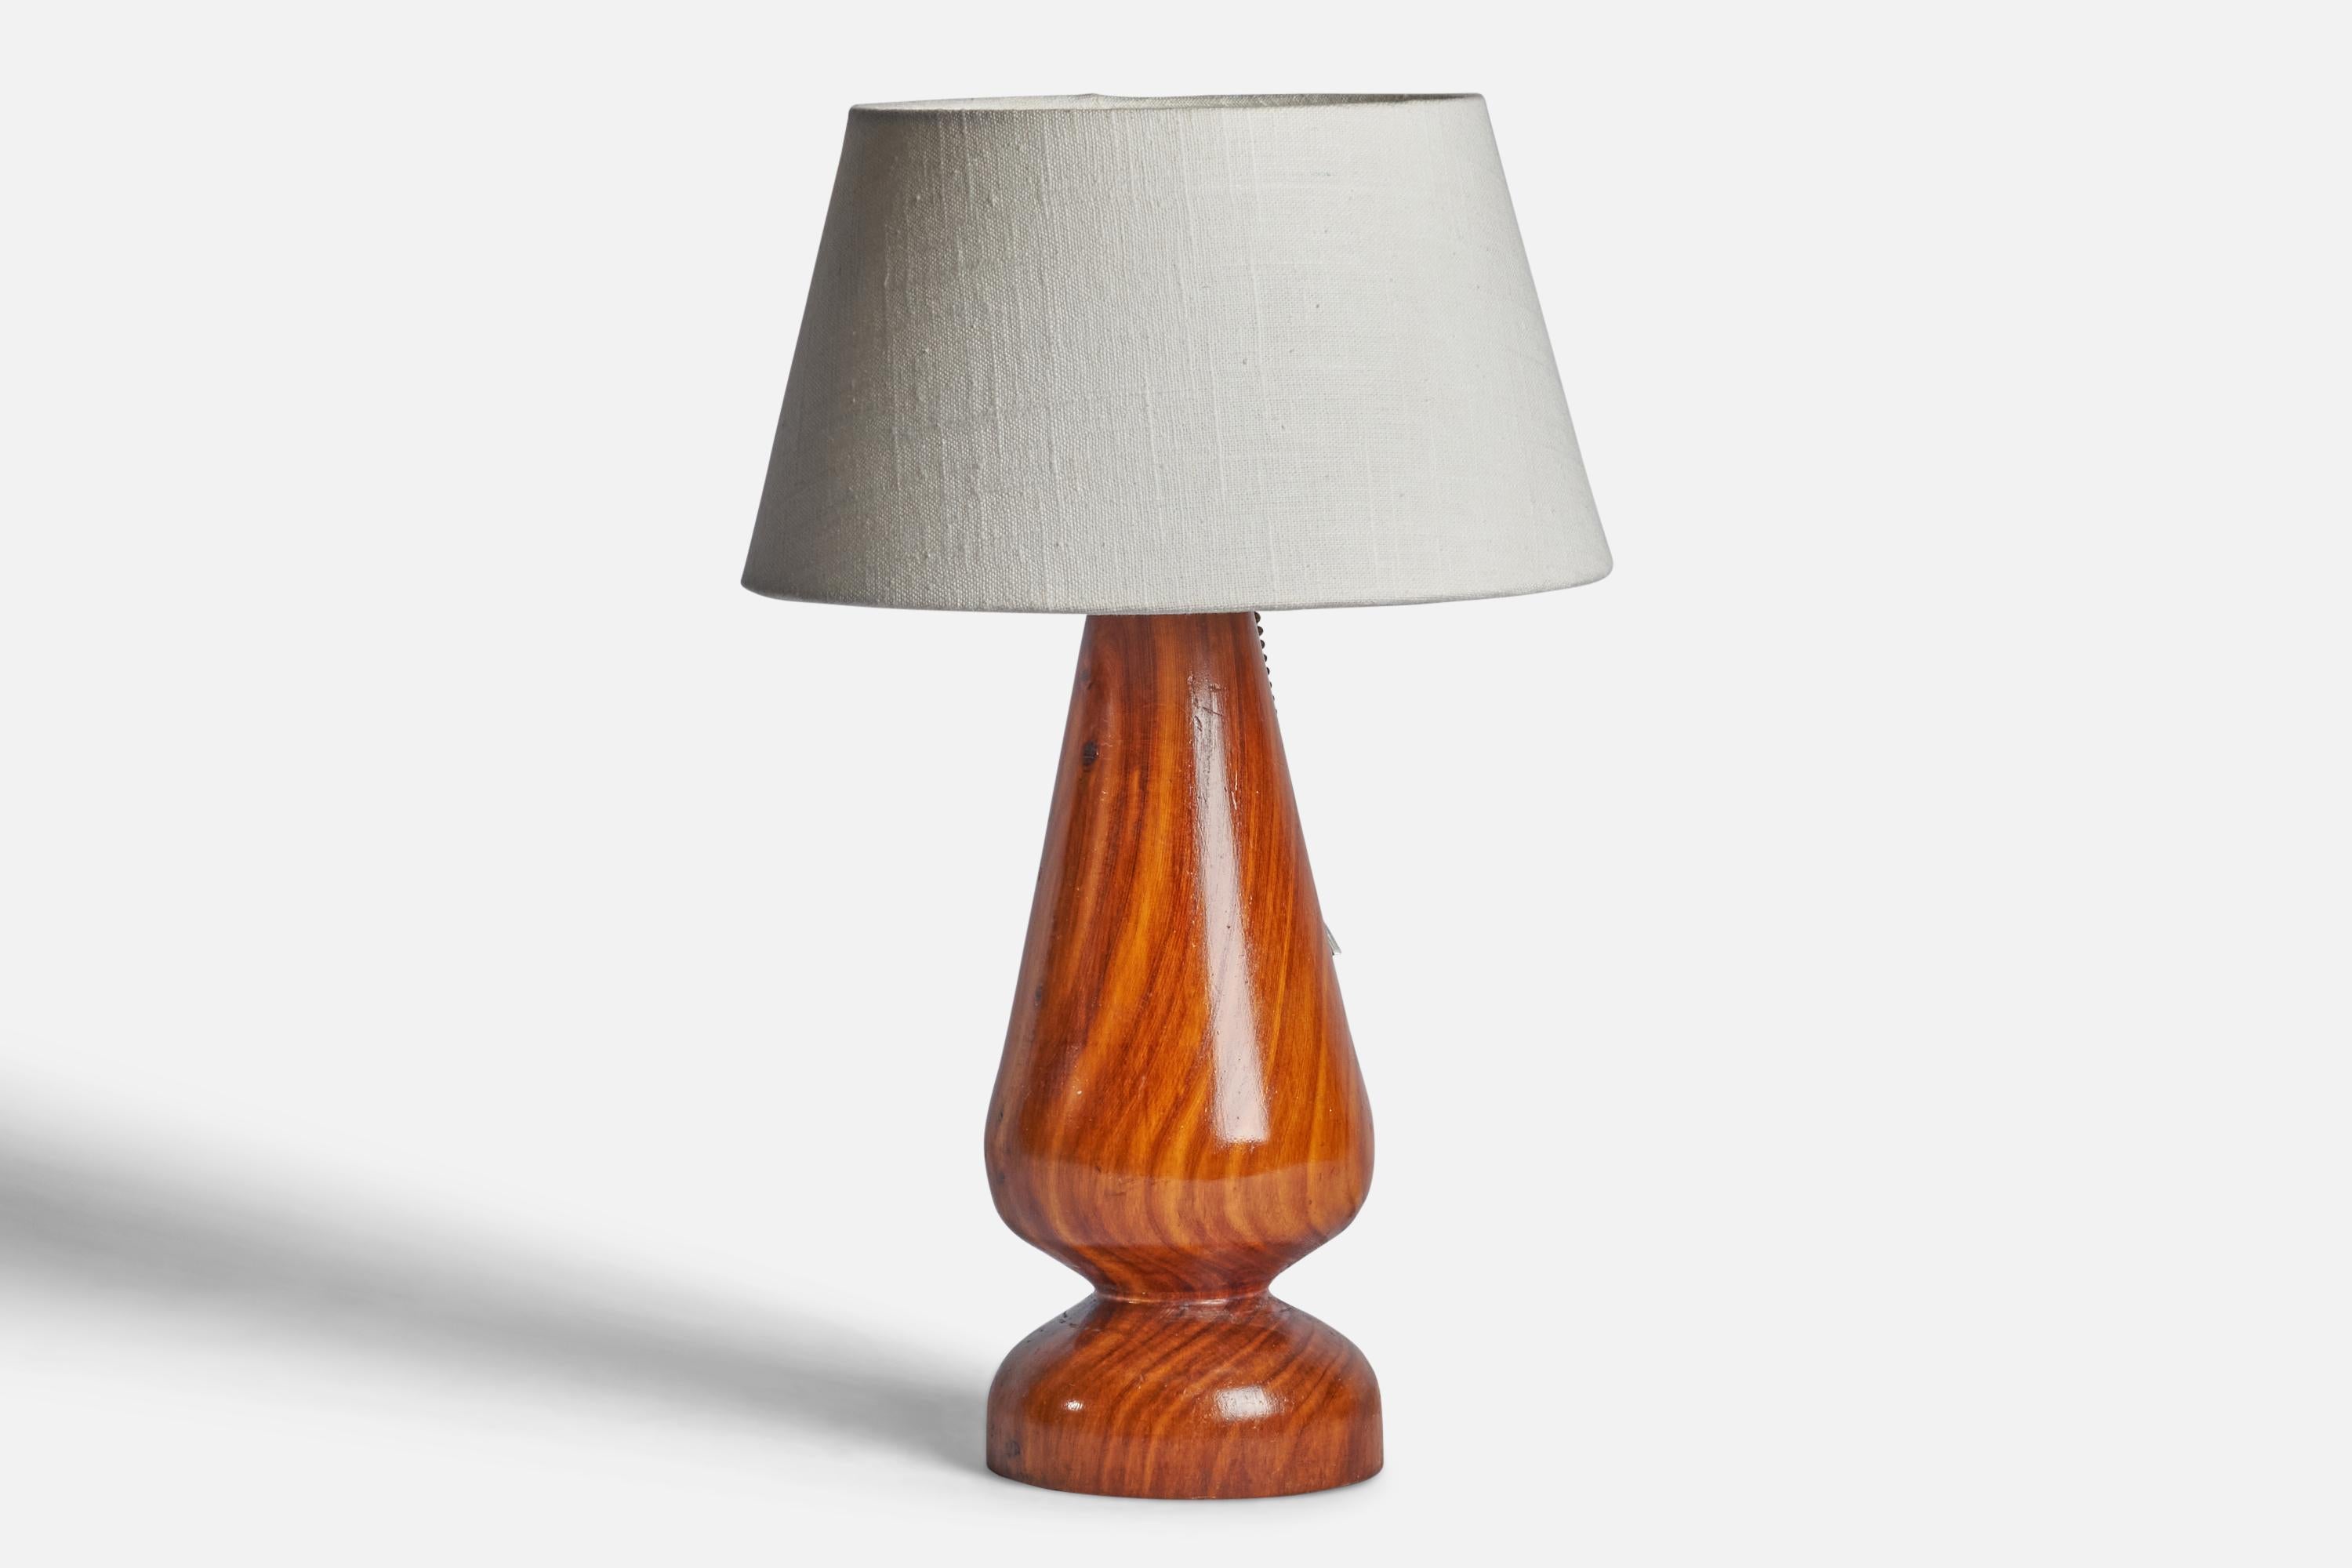 A hardwood table lamp designed and produced in Brazil, c. 1950s.

Dimensions of Lamp (inches): 12.65” H x 4.75” Diameter
Dimensions of Shade (inches): 7” Top Diameter x 10” Bottom Diameter x 5.5” H 
Dimensions of Lamp with Shade (inches): 15.85” H x